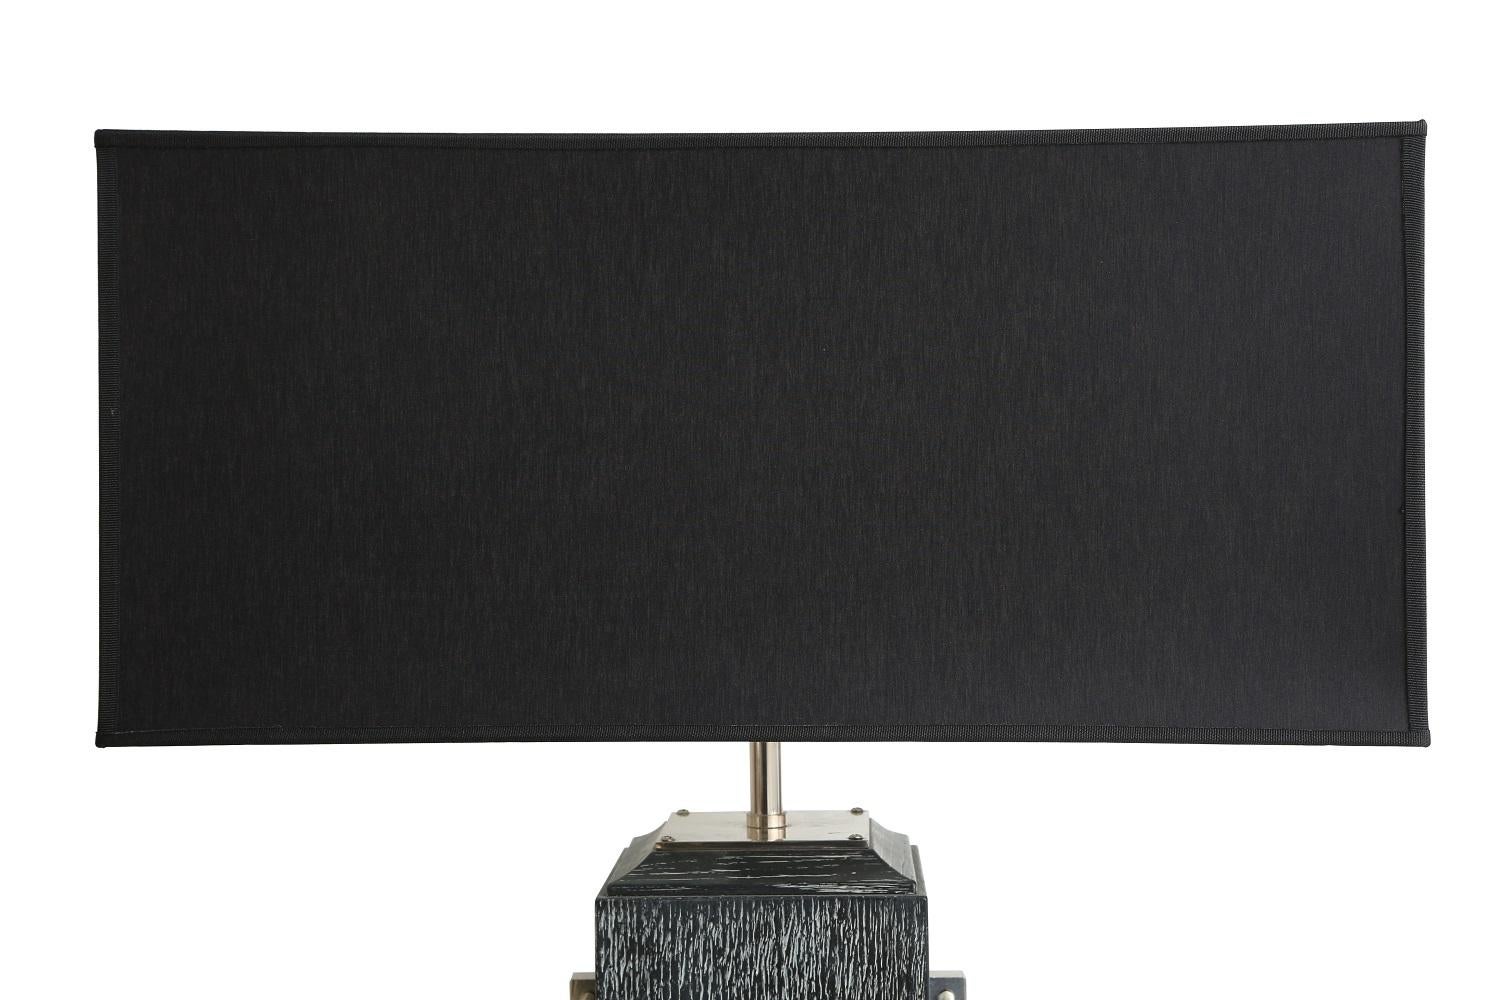 Dark pickled oak table lamp with silver plated brass ornaments and black fabric shade by Chelini. Made in Italy.
33.4